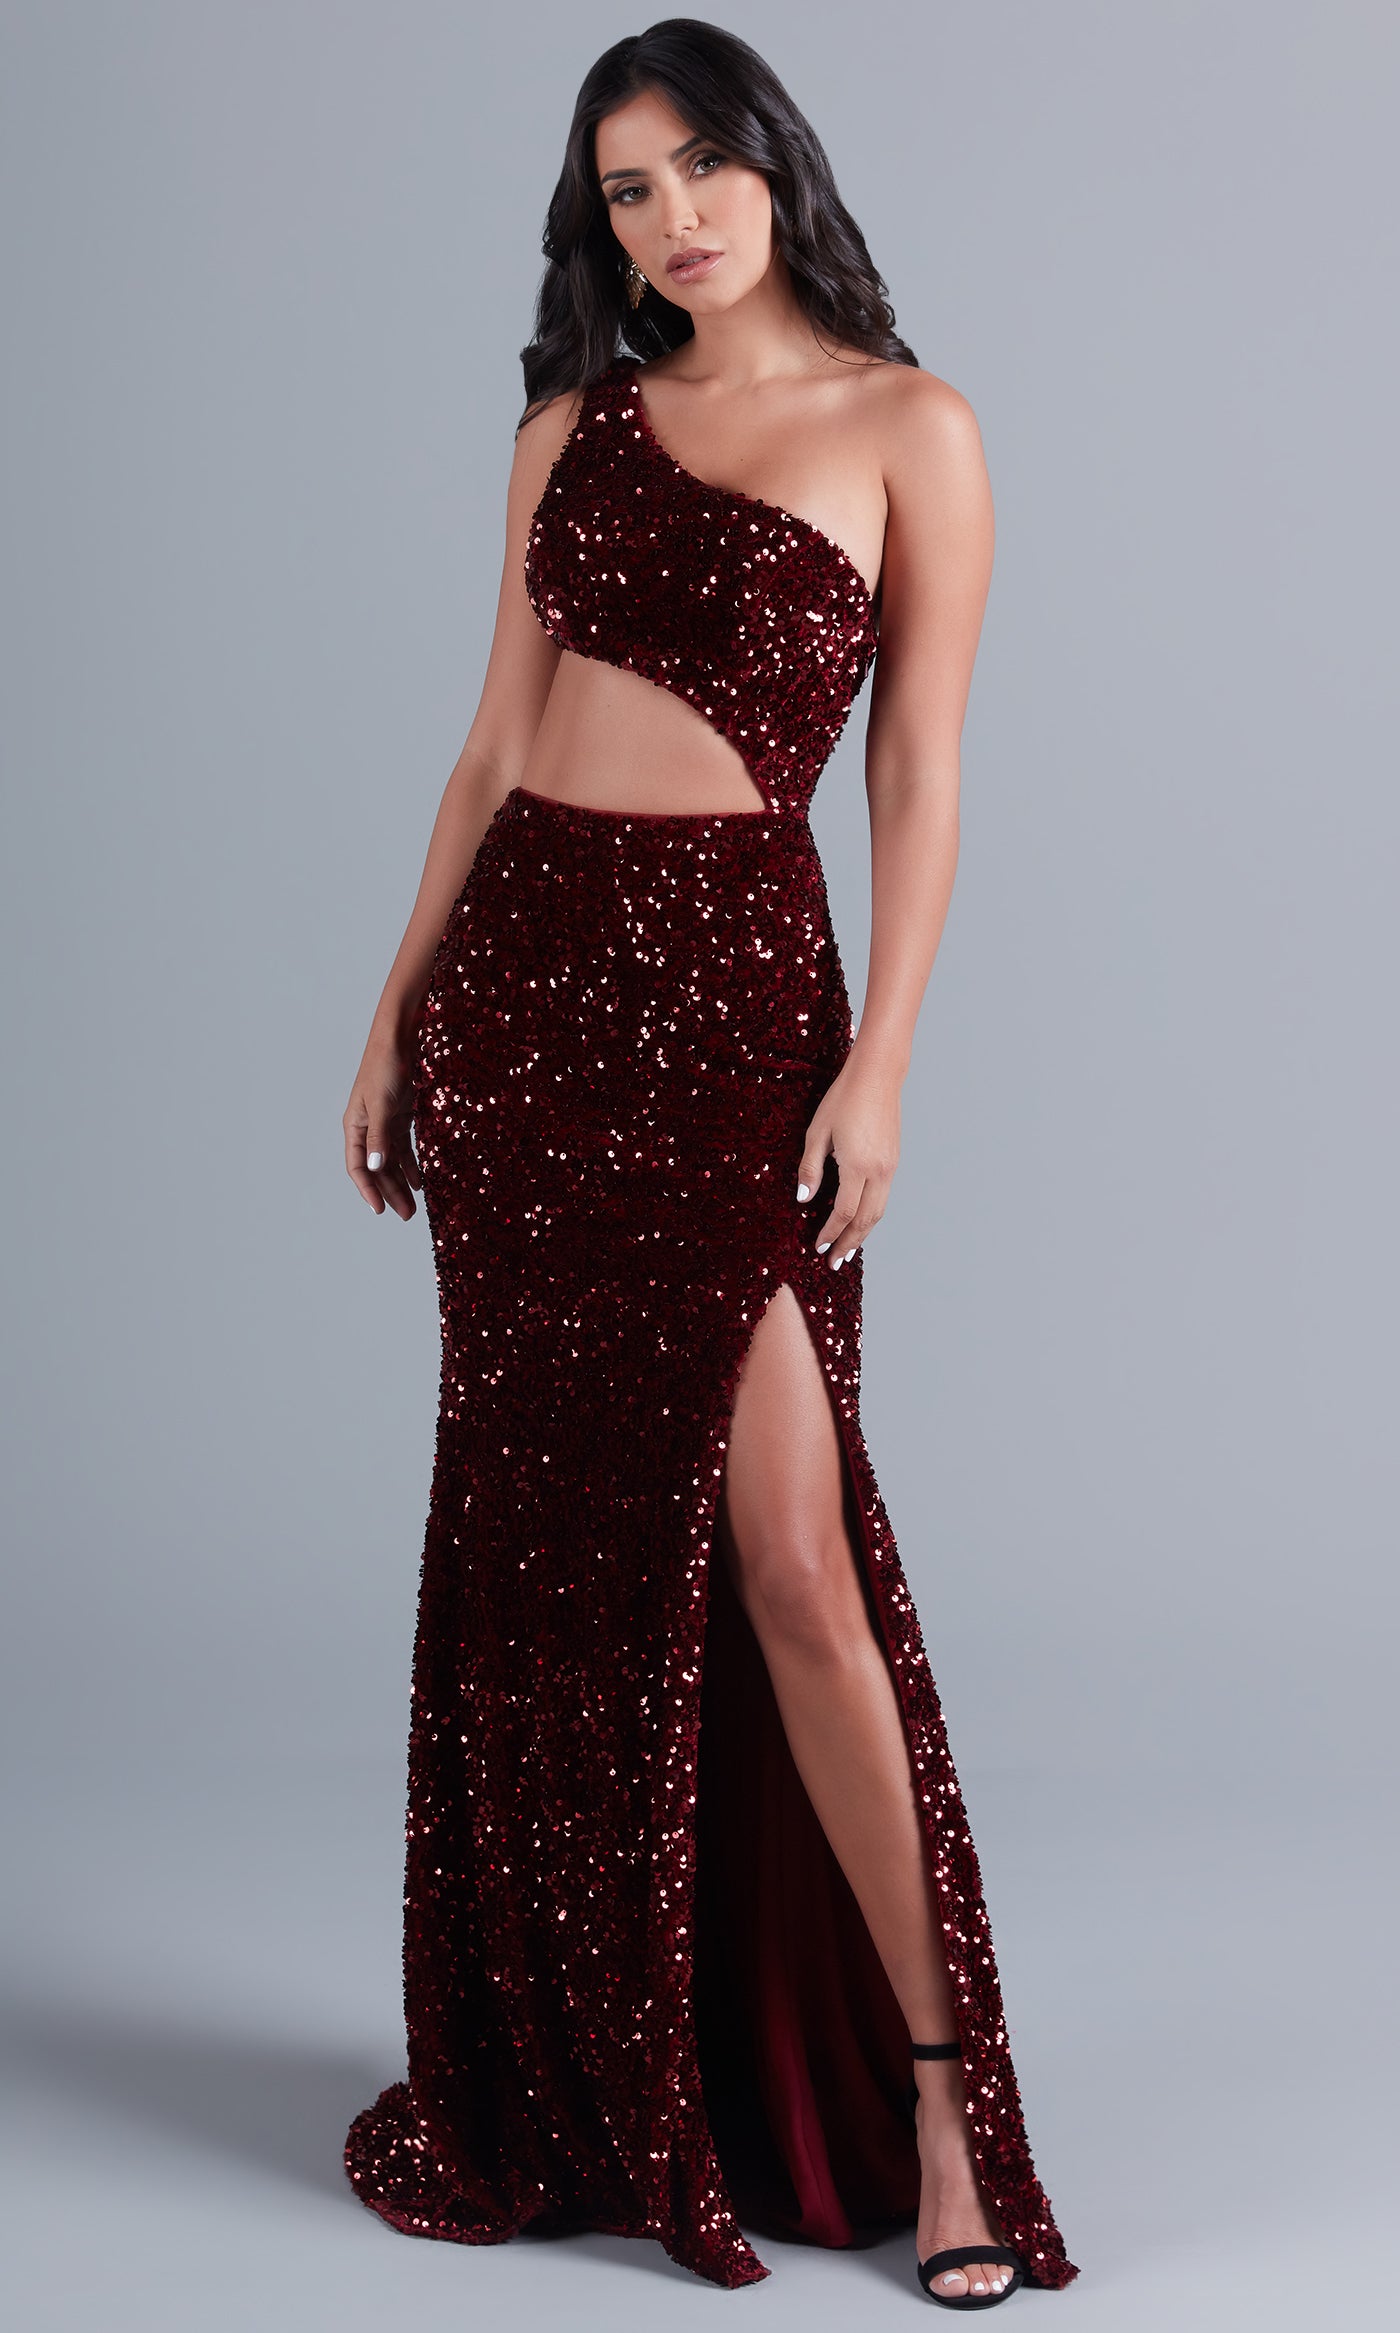 Iriscent Beaded One Shoulder Prom Dress With Slit With Side Cut Out High  Slit Perfect For Formal Parties, Weddings, And Red Capet Runways From  Uniquebridalboutique, $103.42 | DHgate.Com